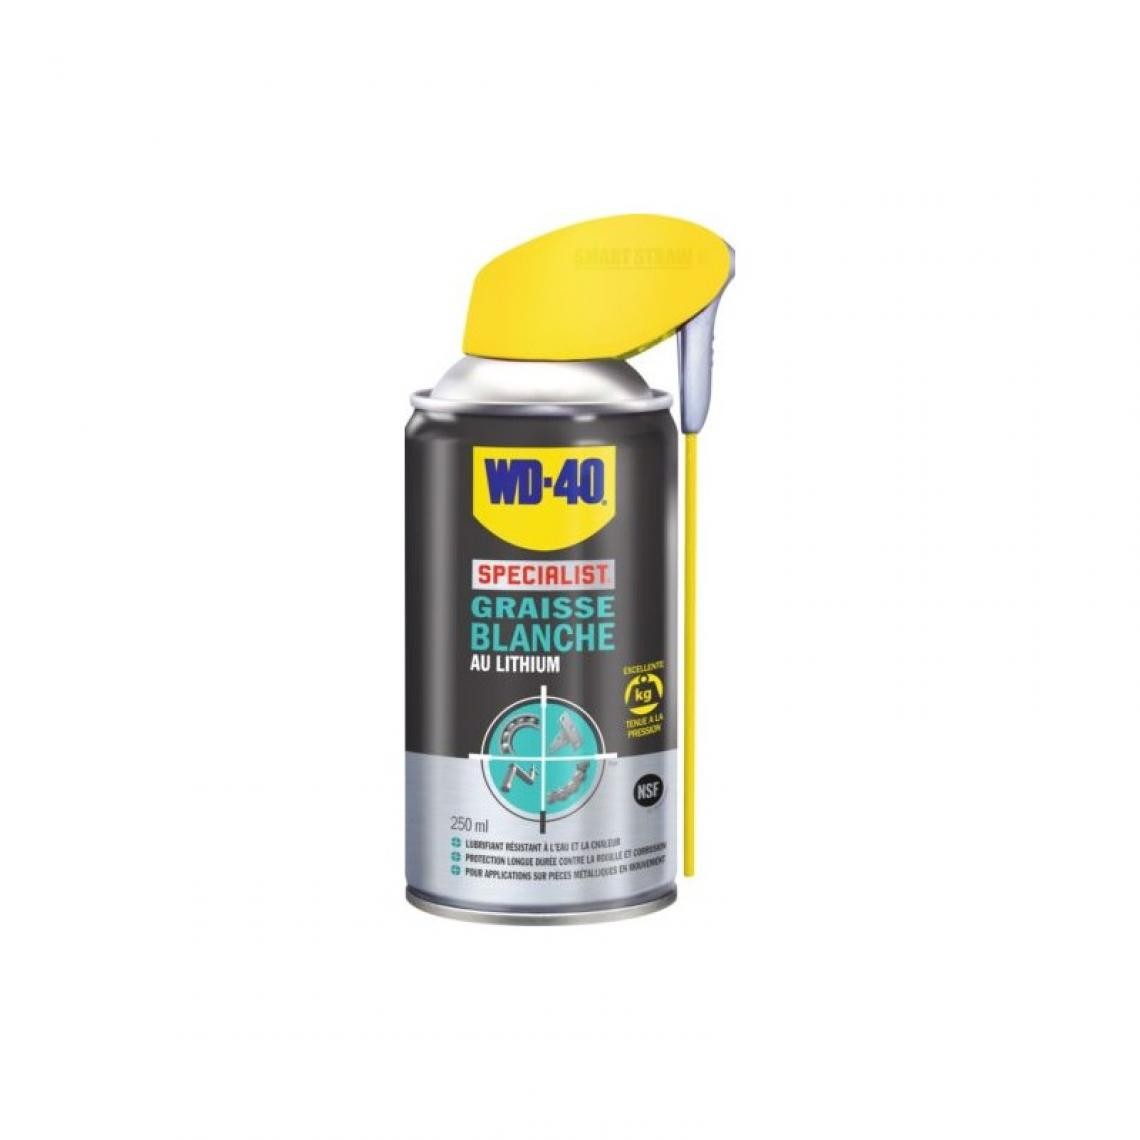 Wd40 - WD40 Specialist Graisse blanche au lithium wd40 250ml - Mastic, silicone, joint